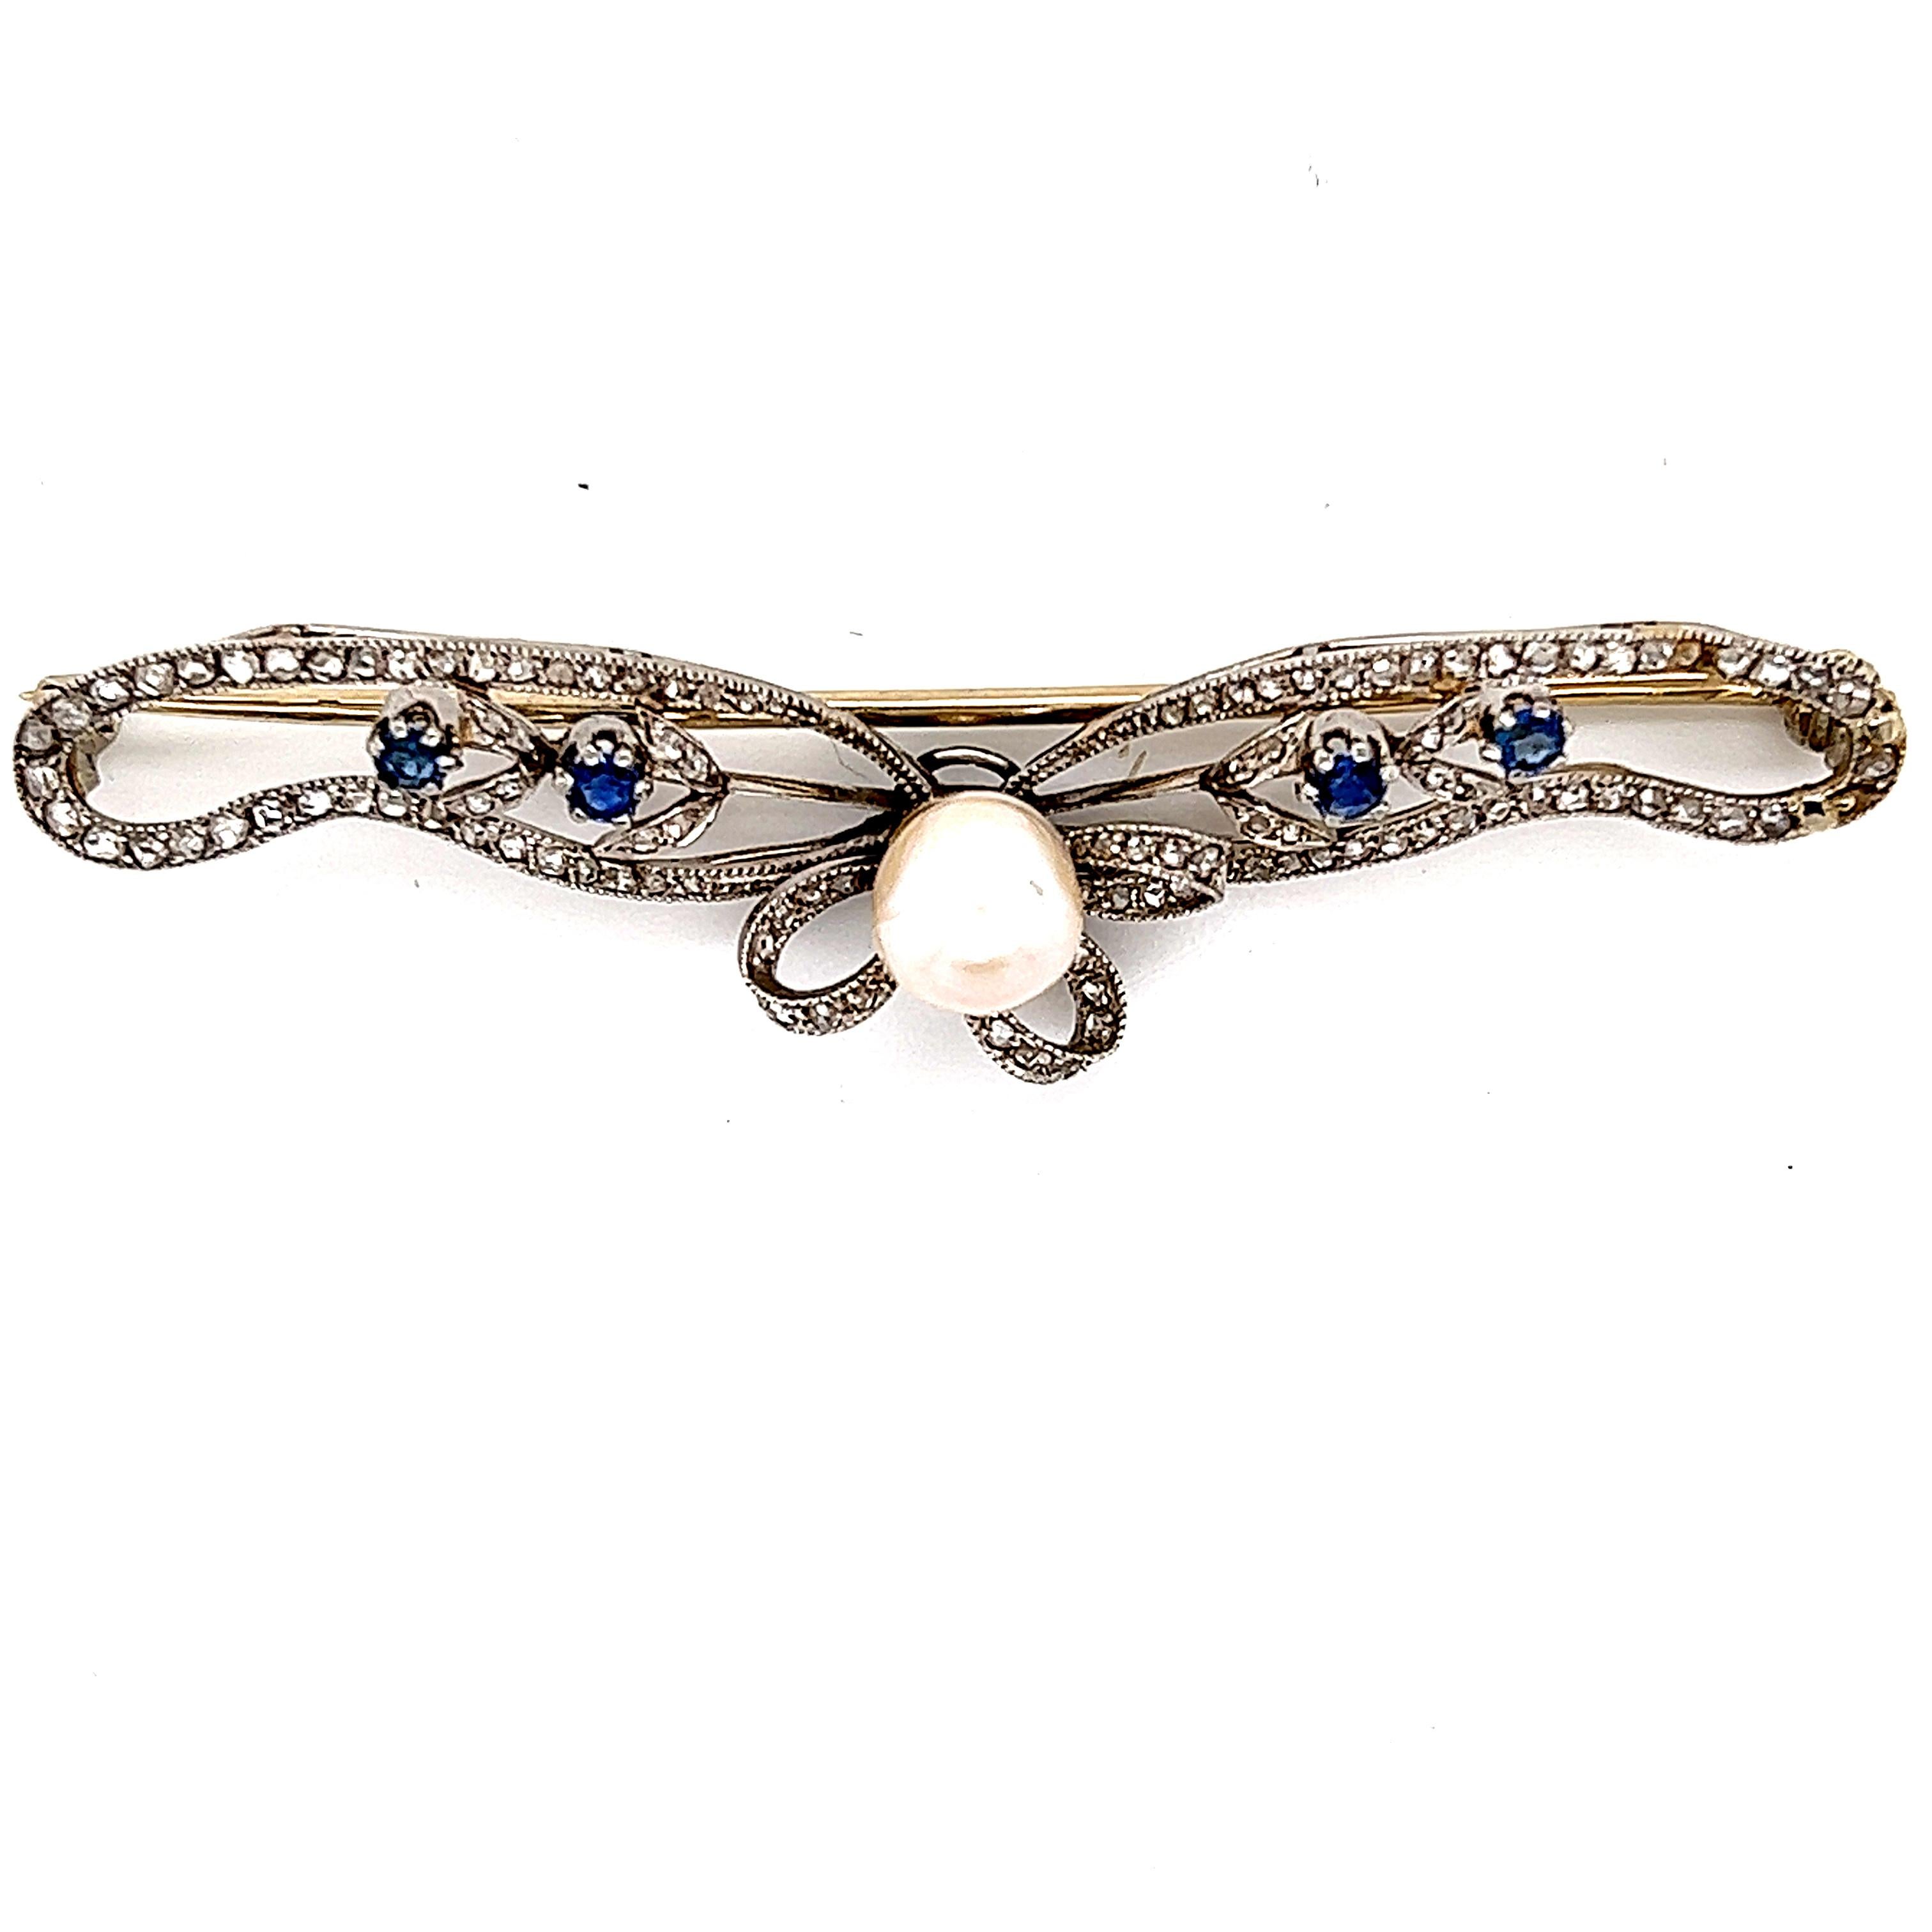 Fantastic display of Belle Epoque jewelry with this decadent ribbon brooch crafted in platinum and 18k gold. The Brooch displays a swirling pattern with a focal point of a center set pearl gemstone with exceptional luster. The brooch is set with